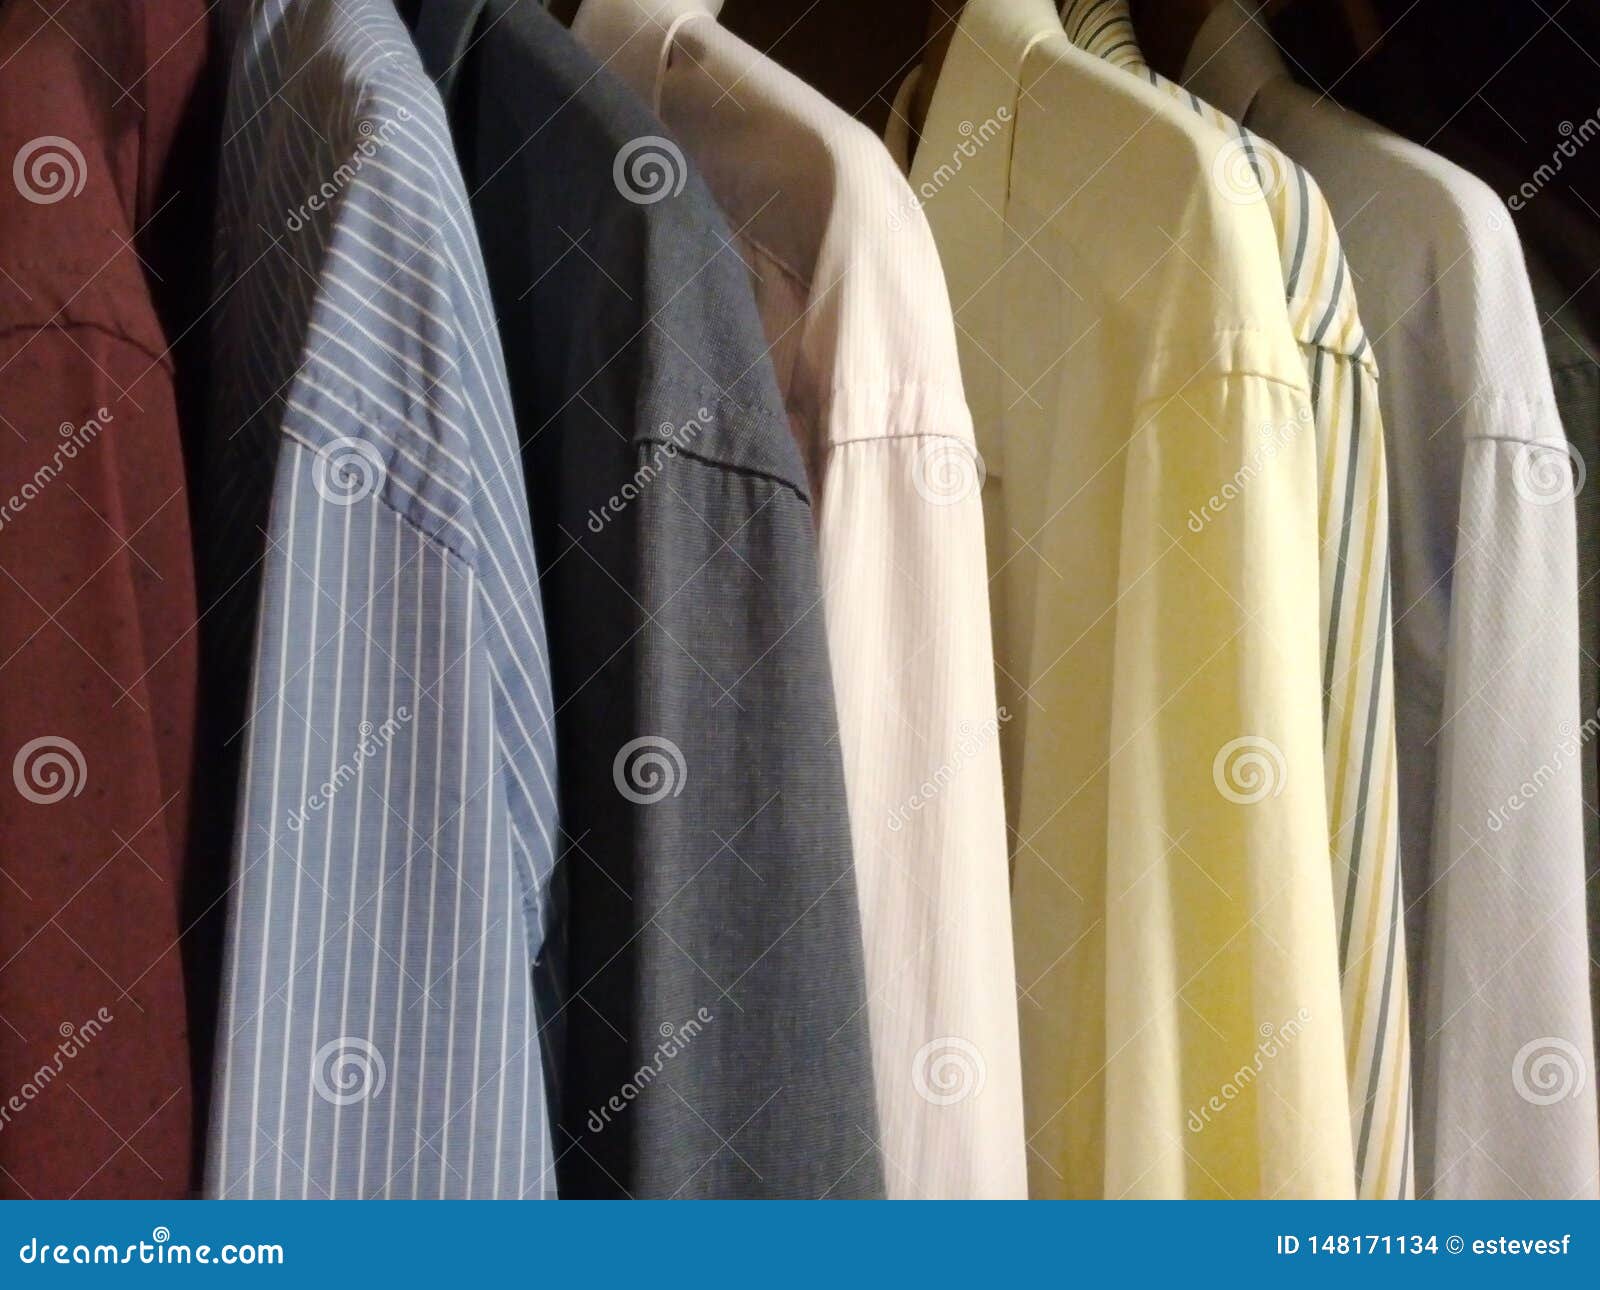 dress shirts in the male closet